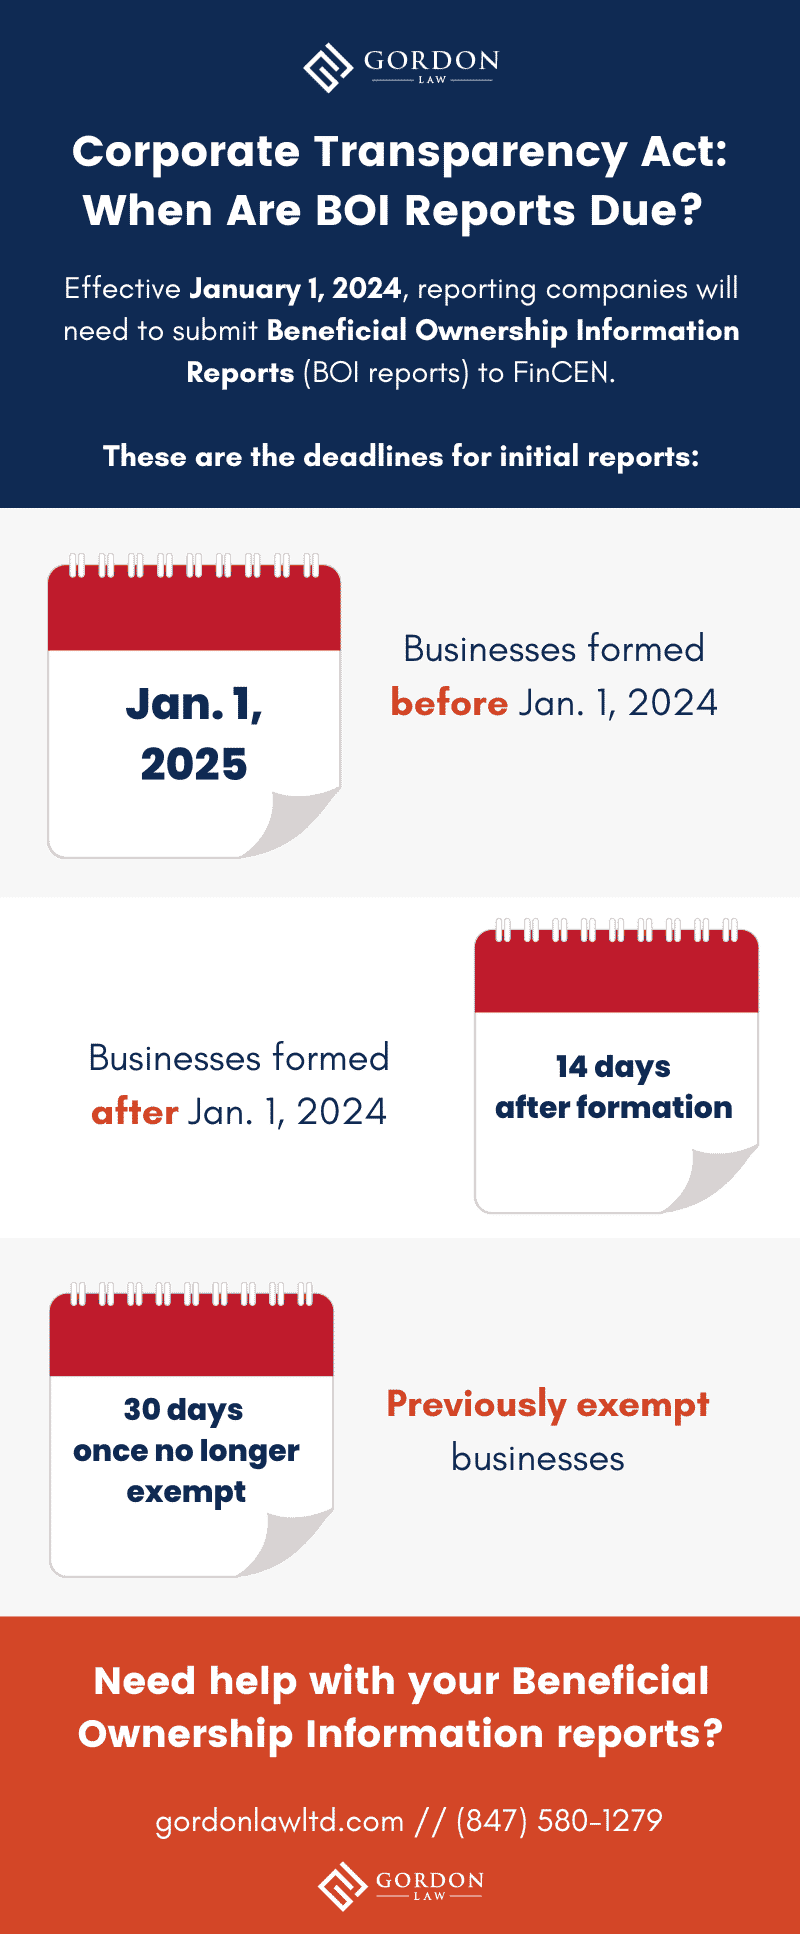 [Infographic] Beneficial Ownership Information Report Deadlines - Corporate Transparency Act